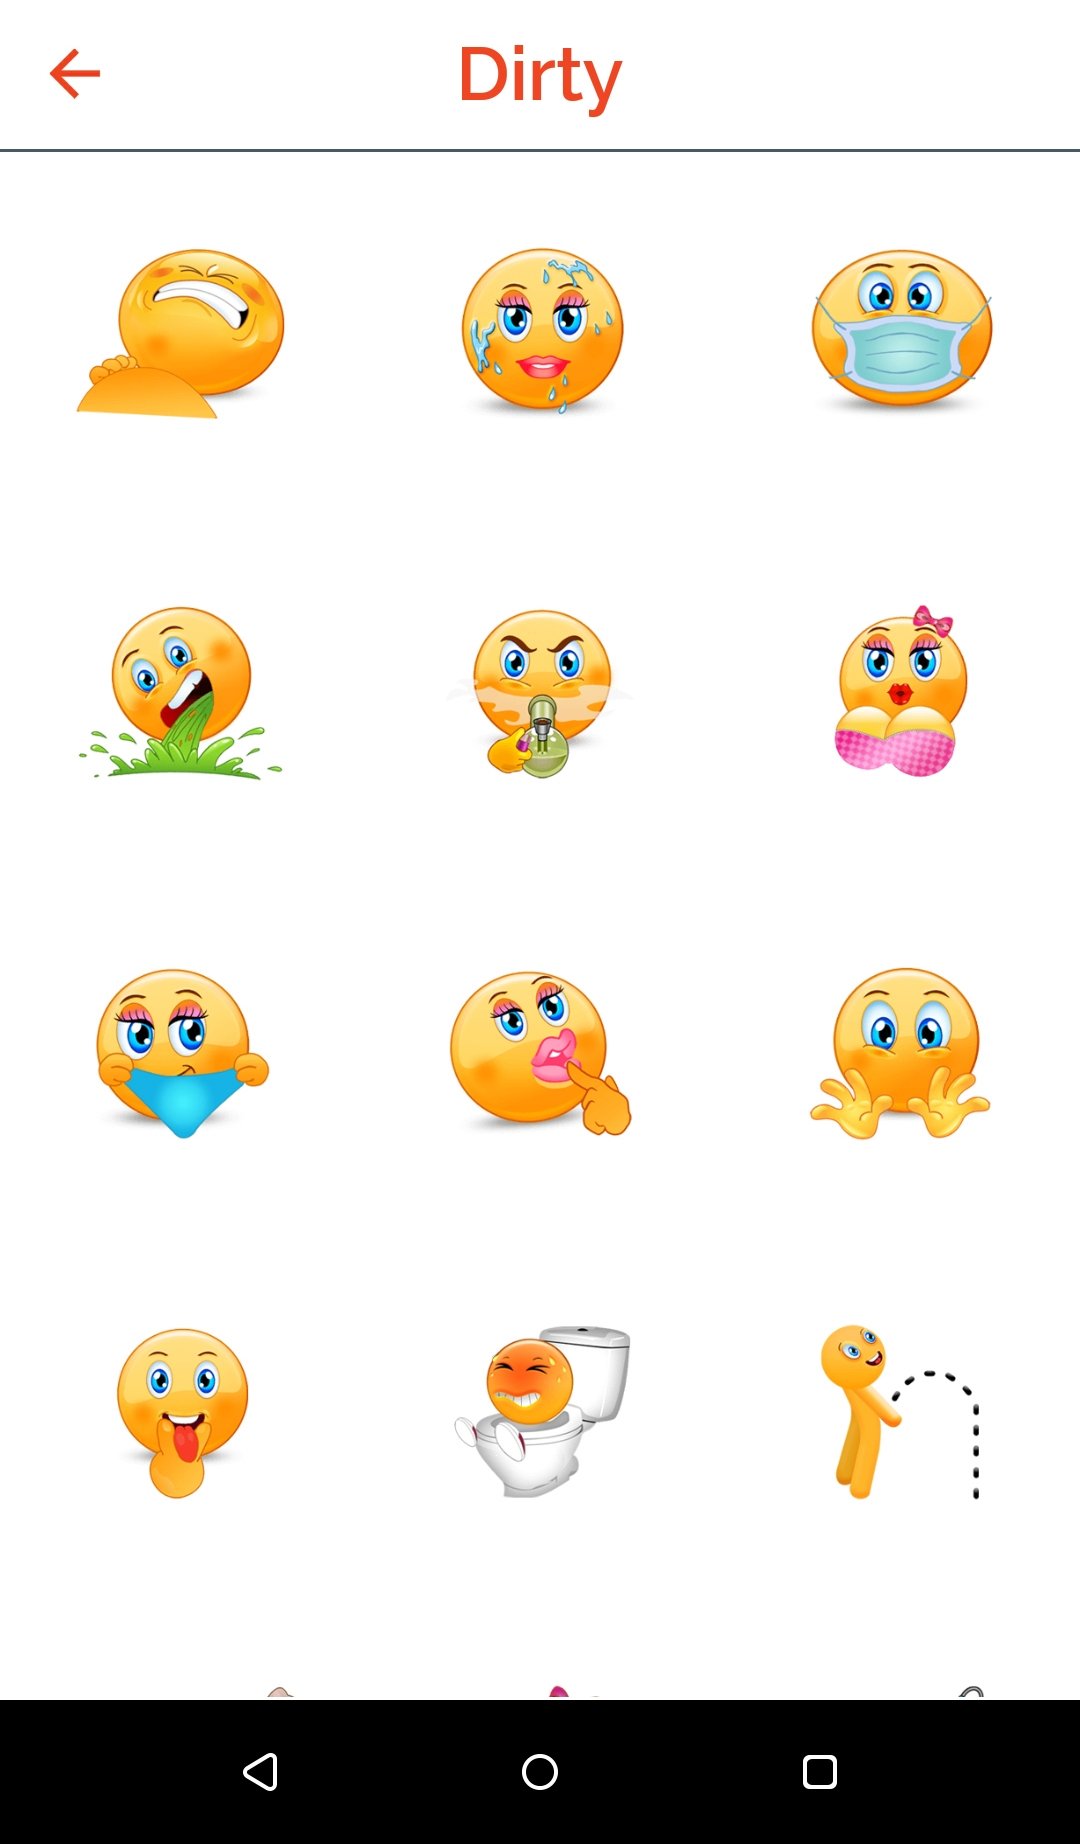 Adult Emojis & Dirty Emoticons Android.